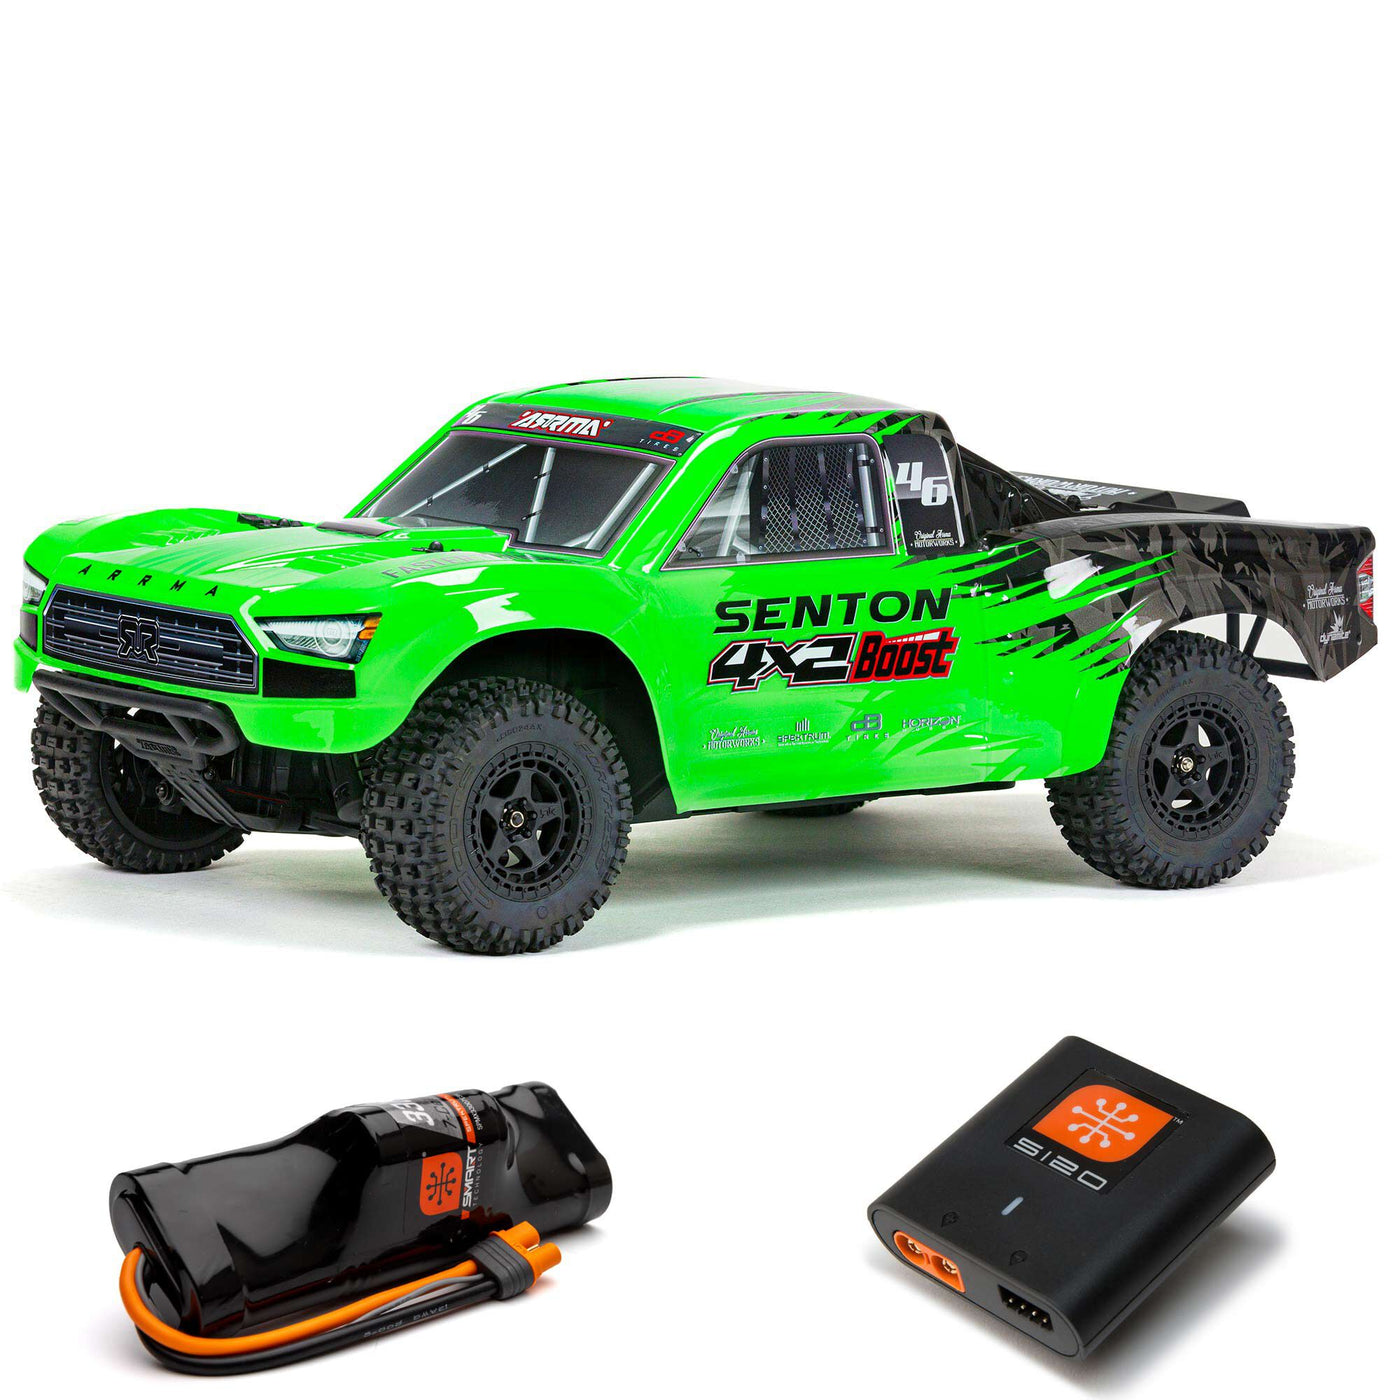 1/10 SENTON 4X2 BOOST MEGA 550 Brushed Short Course Truck RTR with Battery & Charger Arrma ARA4103SV4T